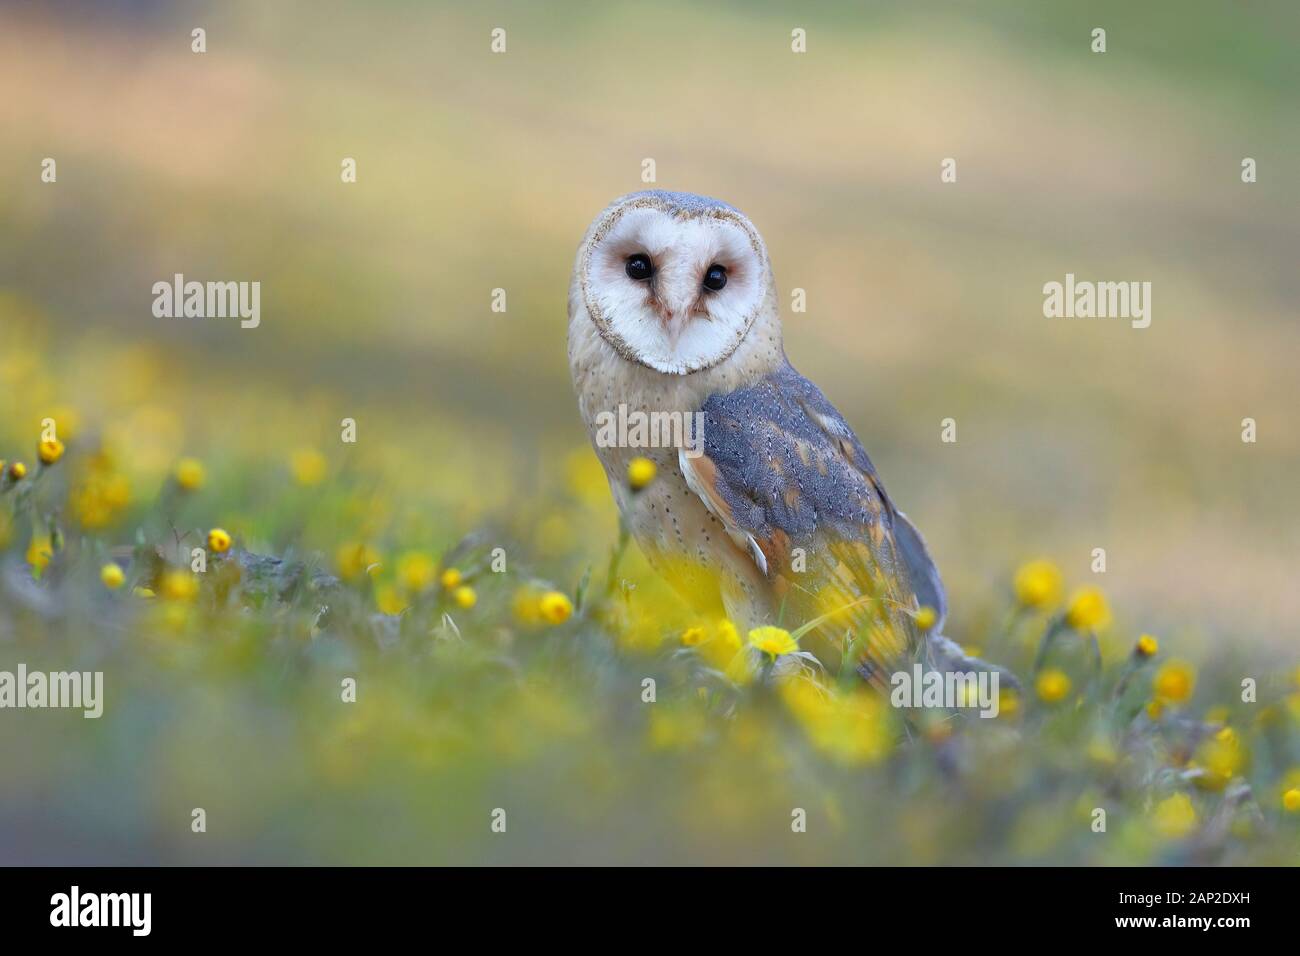 Barn owl sitting on the ground between yellow wild flowers in summer Stock Photo